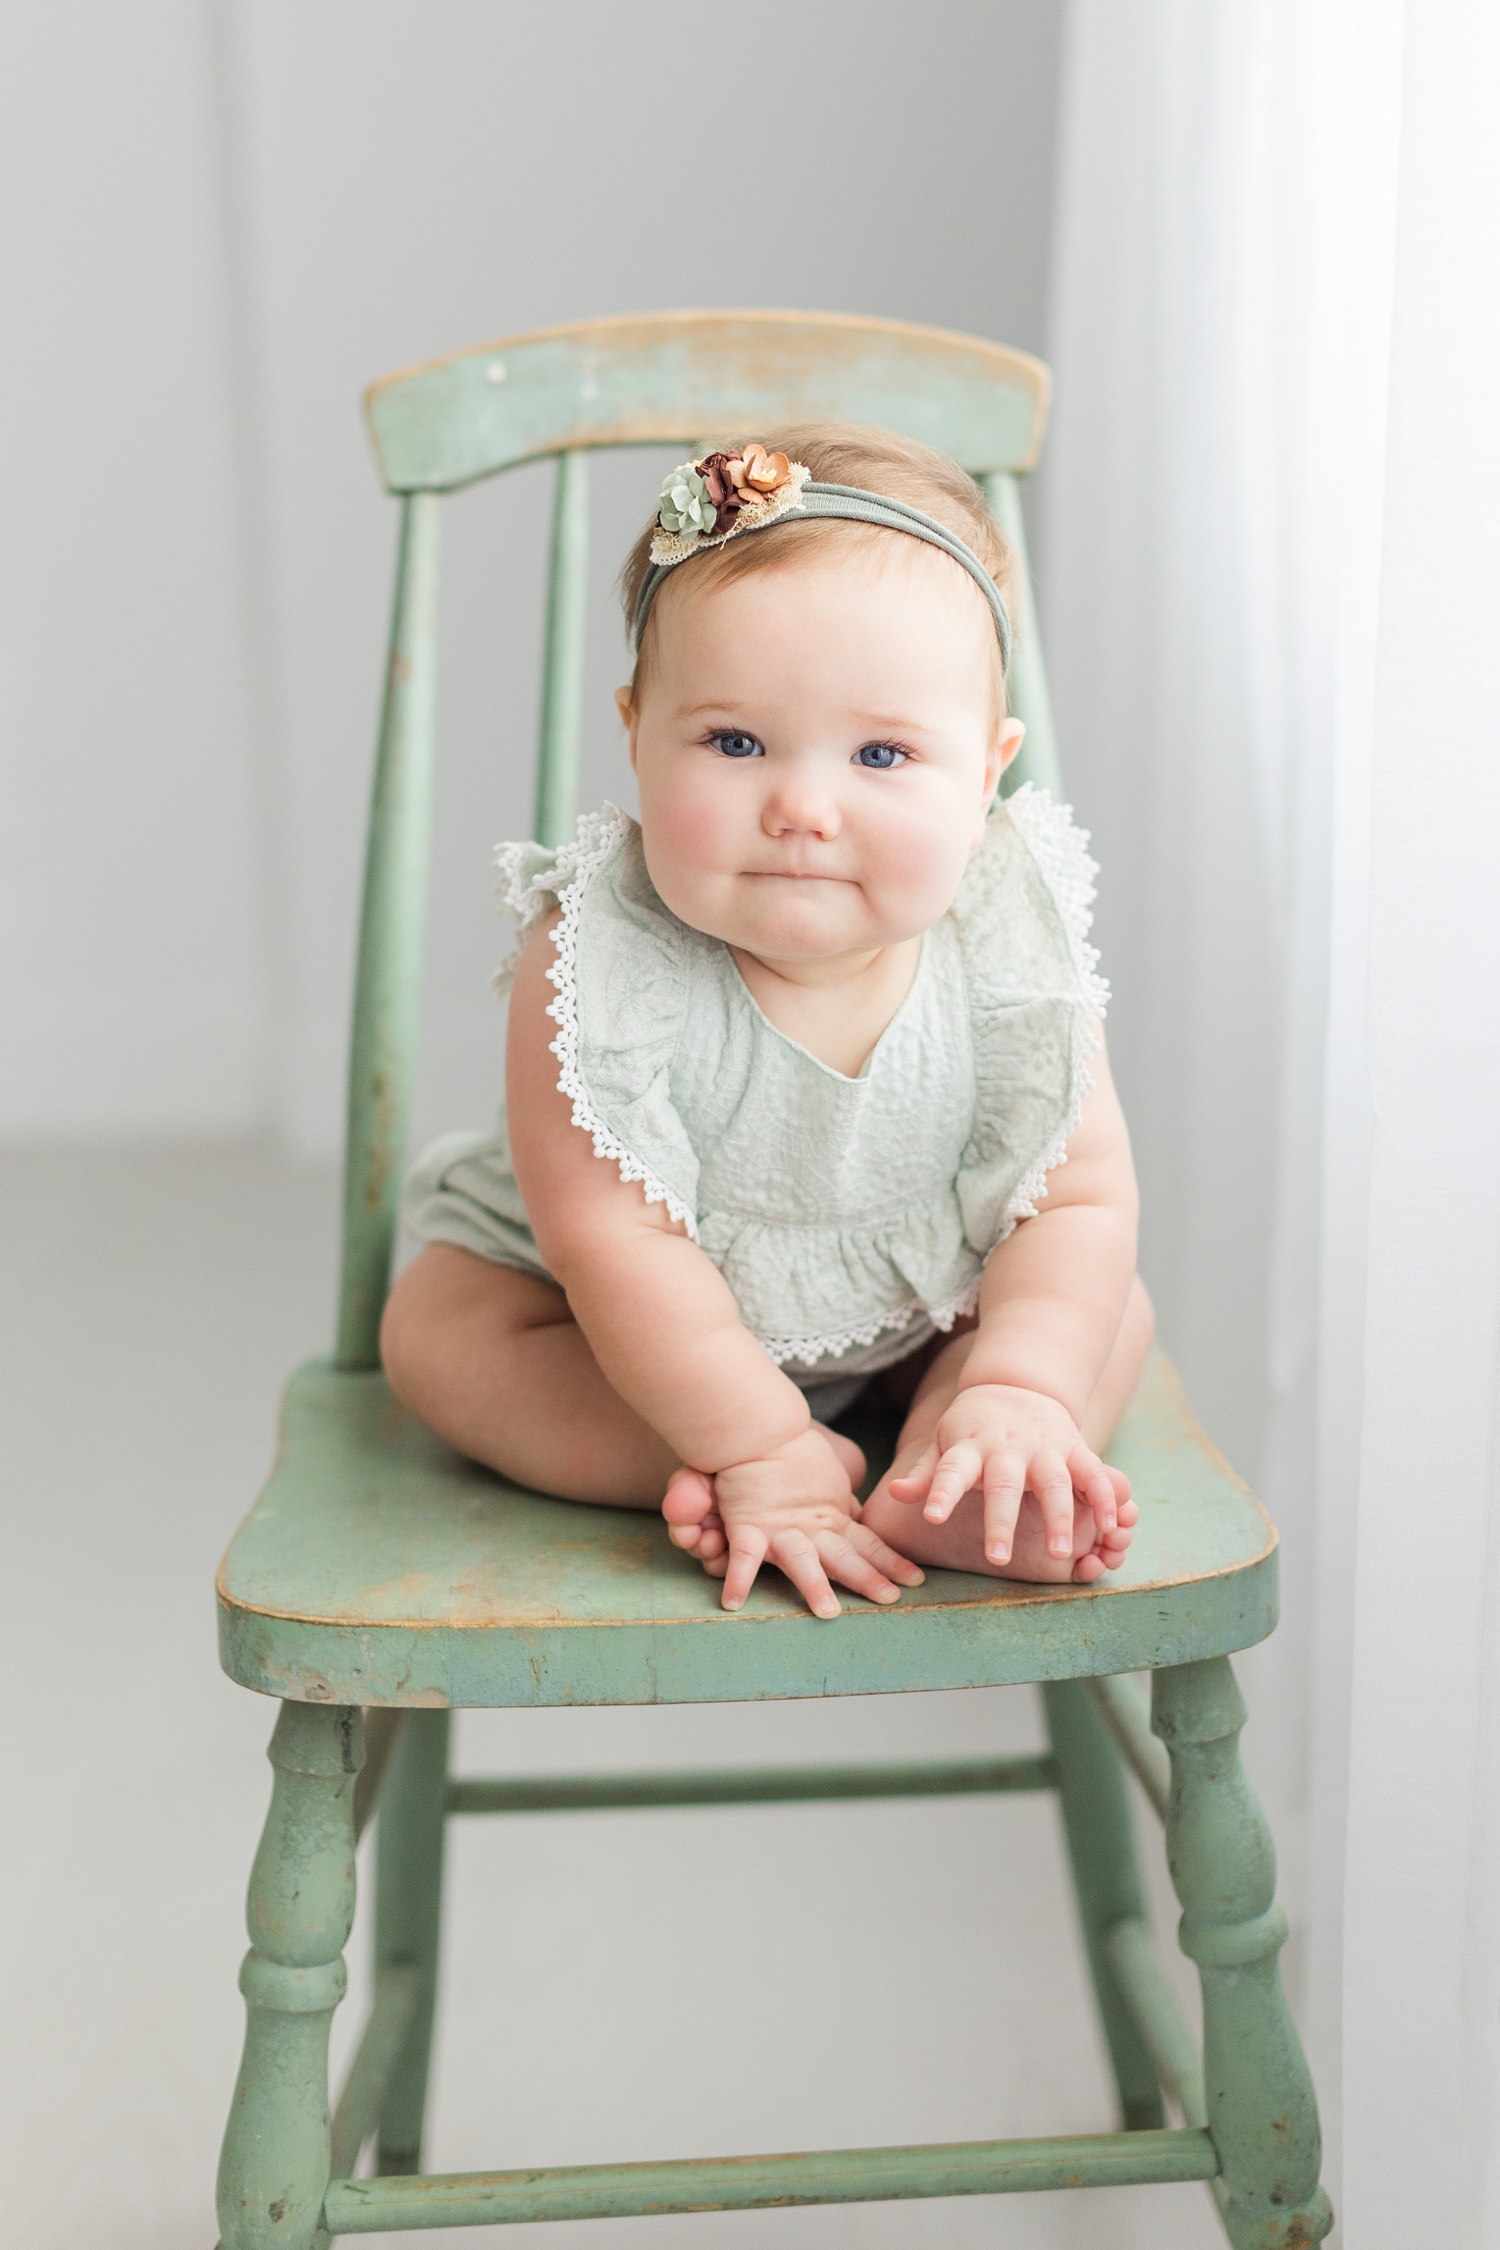 Baby Ivy dressed in green sits on a green chair next to a window draped in white sheer curtains | CB Studio